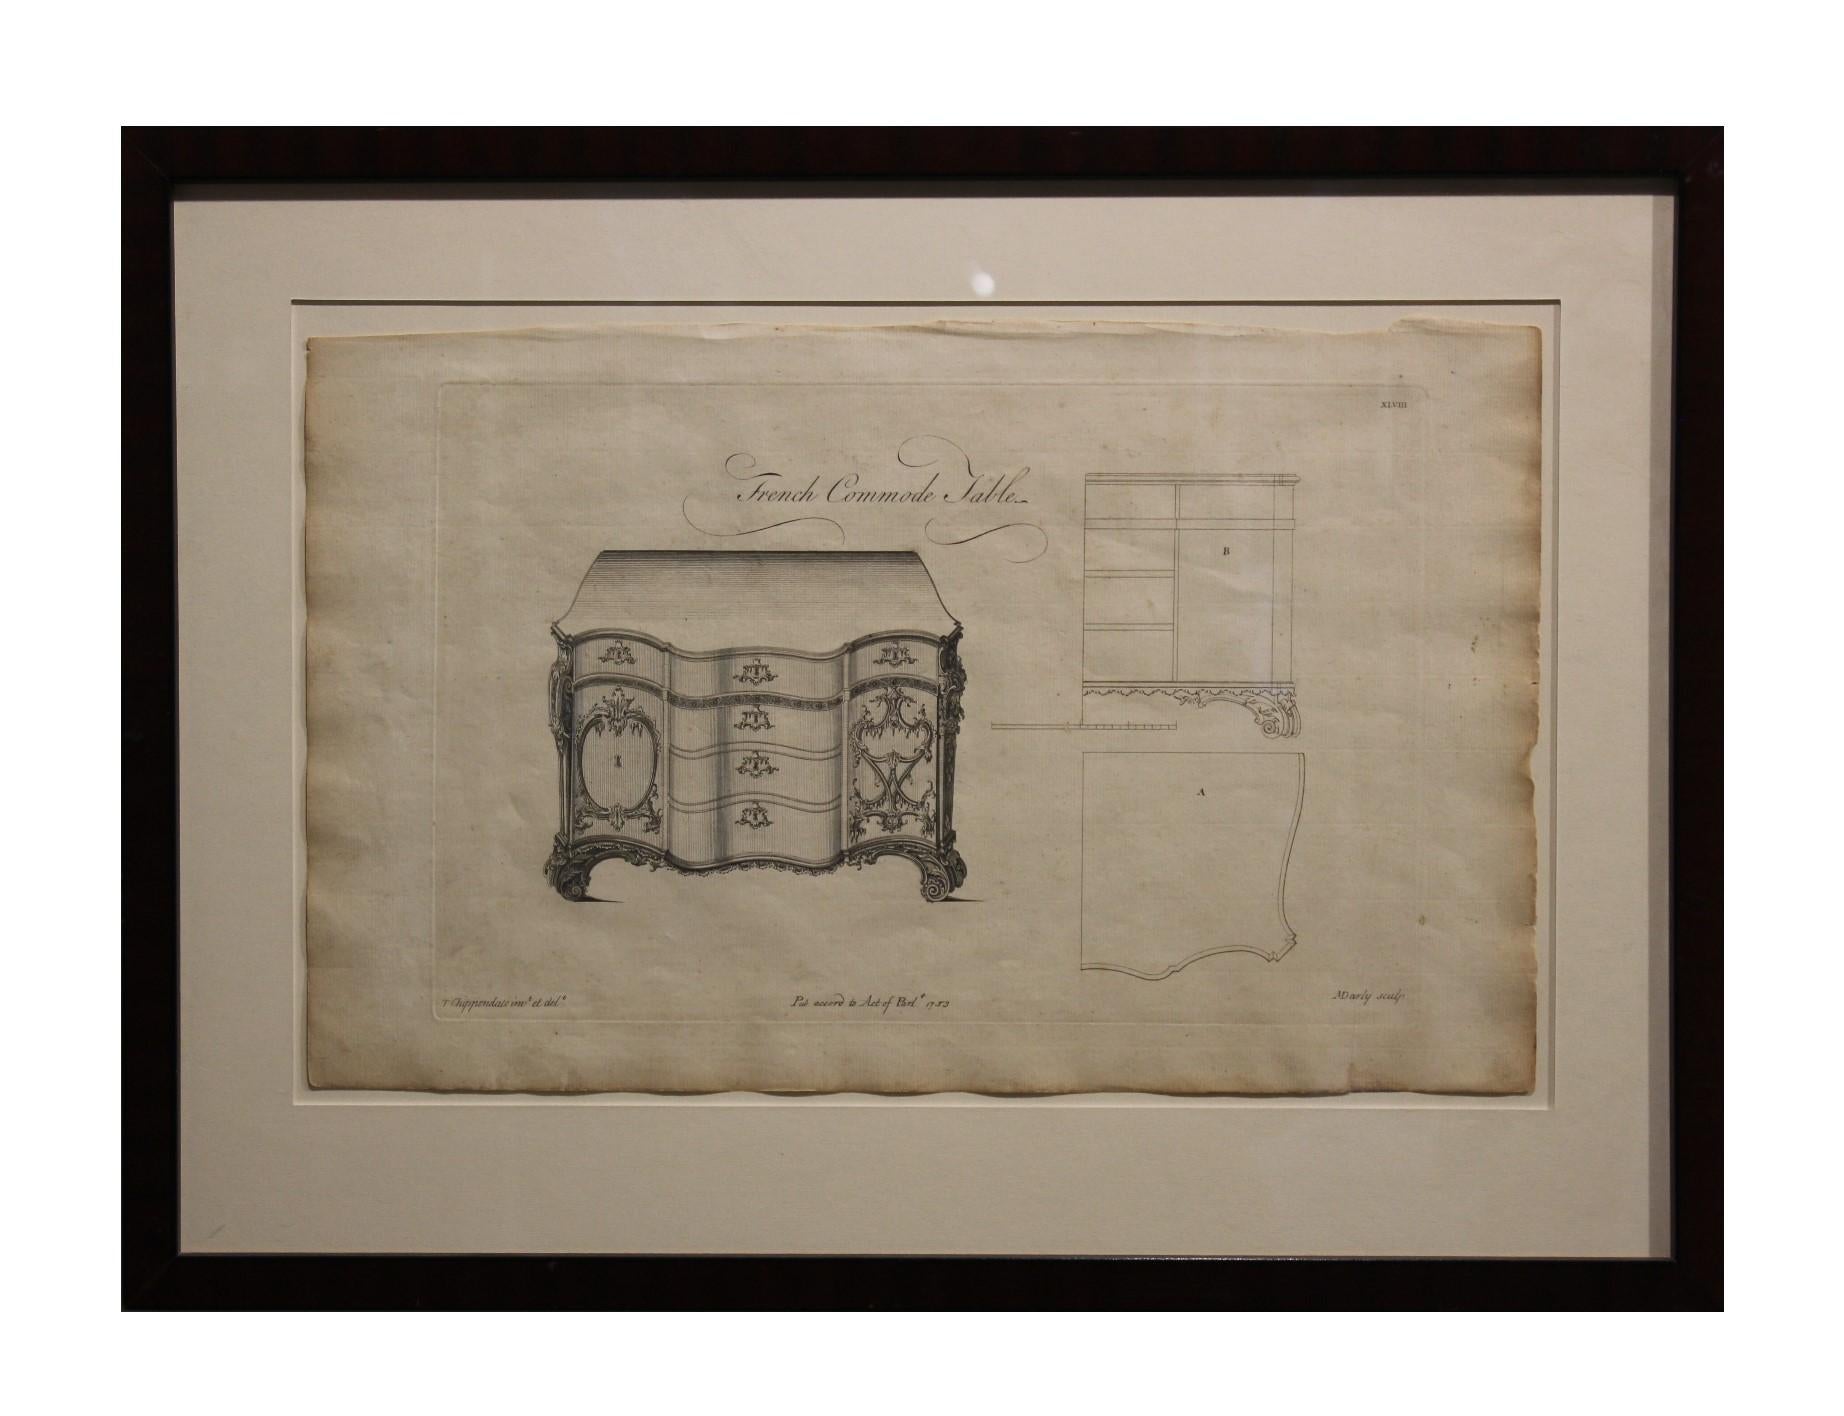 Thomas Chippendale Interior Print - French Commode Table Etching From "The Gentleman and Cabinet-Maker's Director"